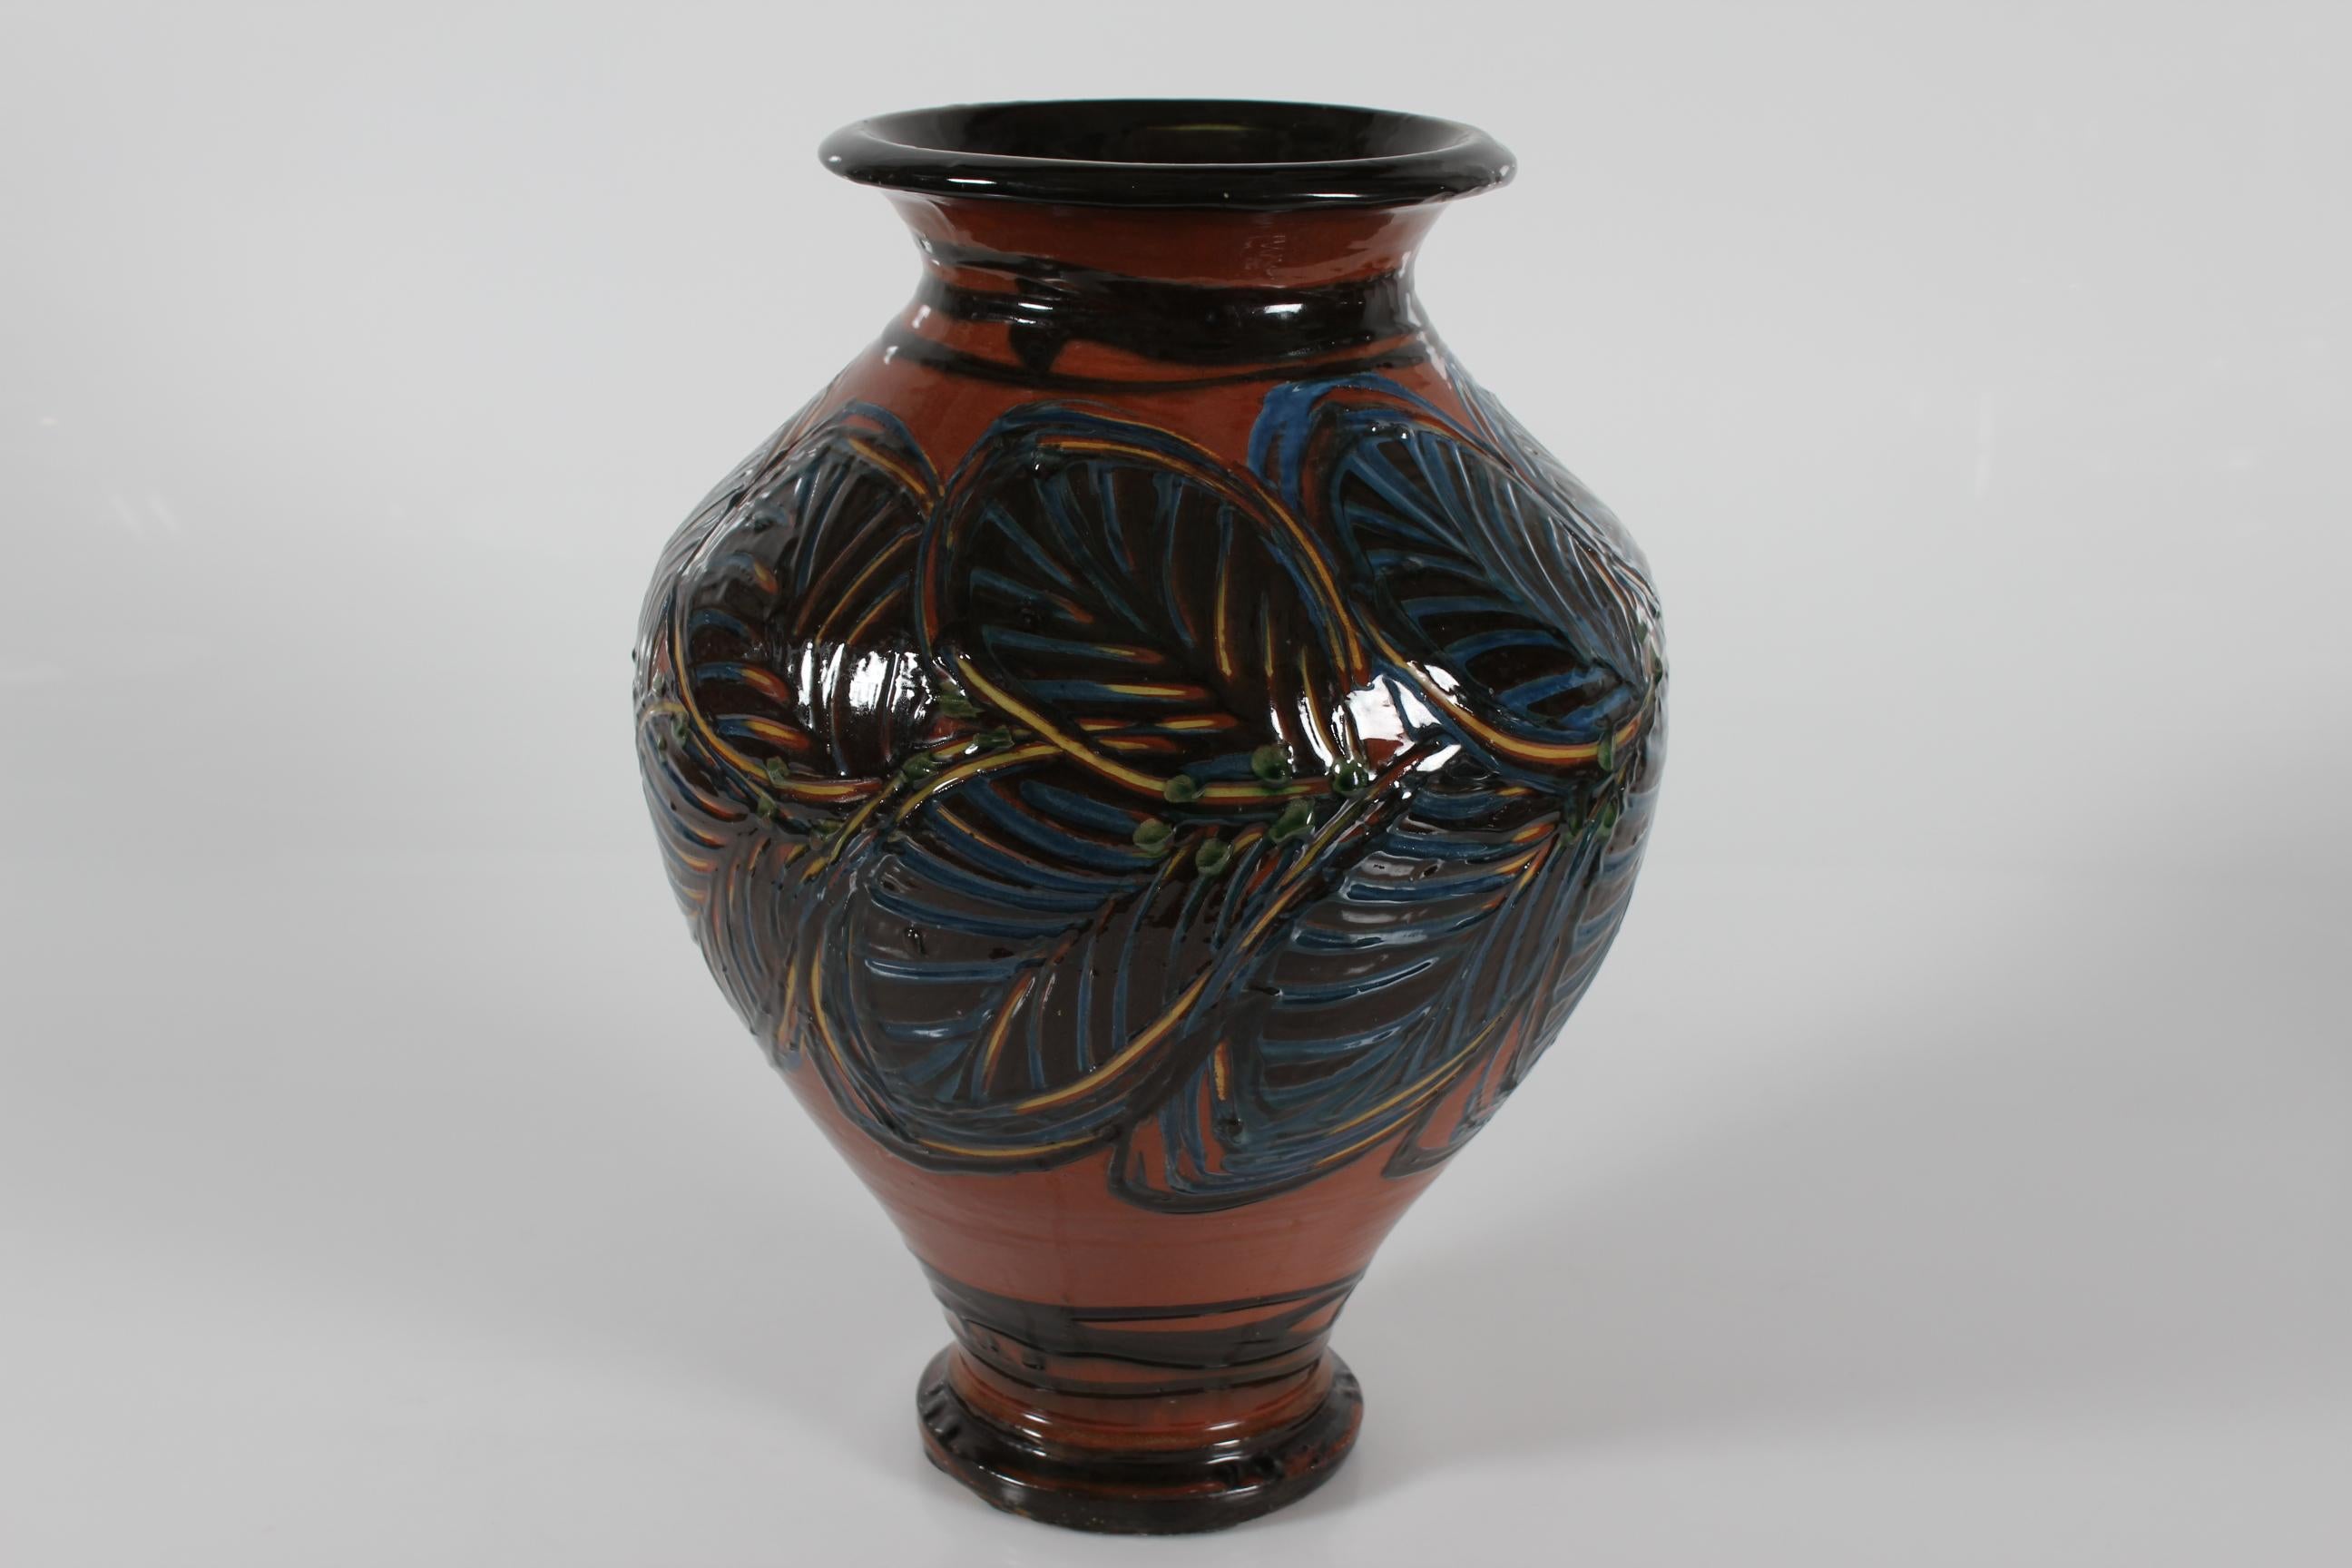 Large Art Nouveau ceramic floor vase made by Herman A. Kähler ceramic works in Denmark in the period 1925-1935
The vase is decorated with leaves by hand with the special cow horn technique. 
The glaze is dark blue, rust brown and black.

Sign. HAK